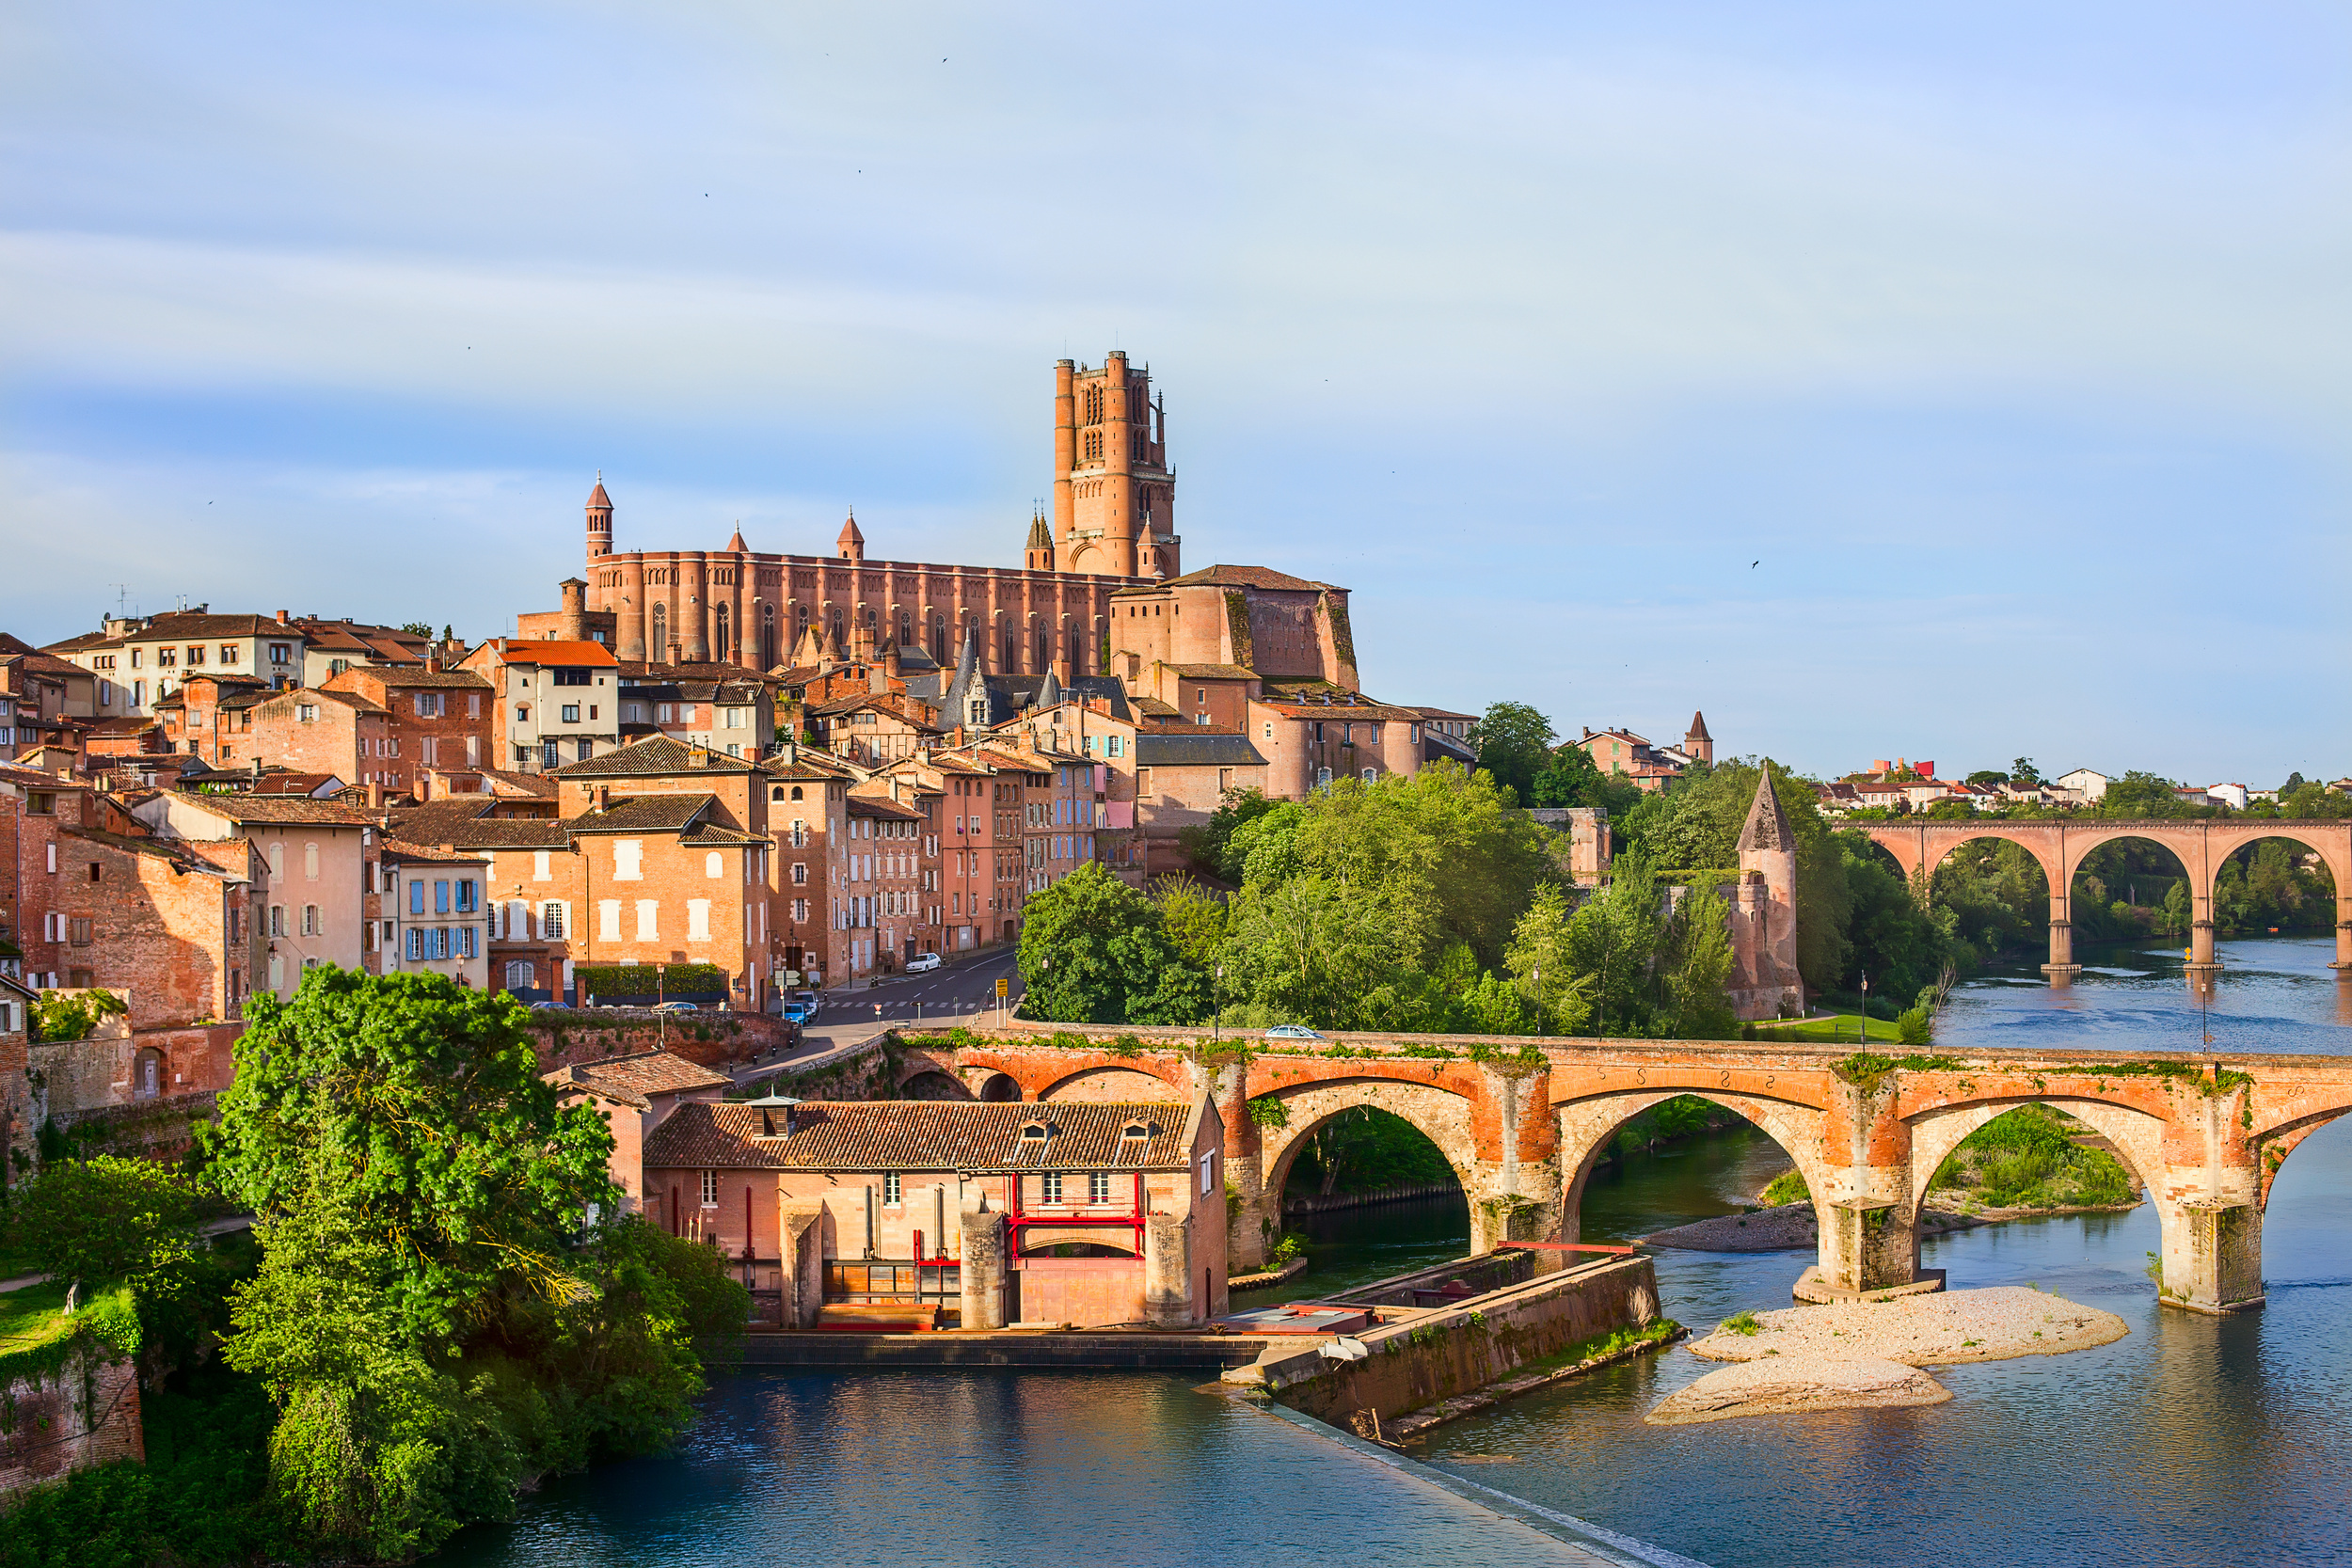 <p>Southwestern France's largest city is also very young. This means there are plenty of cafes and bars to occupy would-be travelers. Additionally, Toulouse is known as "La Vie en Rose" or "The Pink City," thanks to specifically colored bricks that make up the city center.</p><p><a href='https://www.msn.com/en-us/community/channel/vid-cj9pqbr0vn9in2b6ddcd8sfgpfq6x6utp44fssrv6mc2gtybw0us'>Follow us on MSN to see more of our exclusive lifestyle content.</a></p>